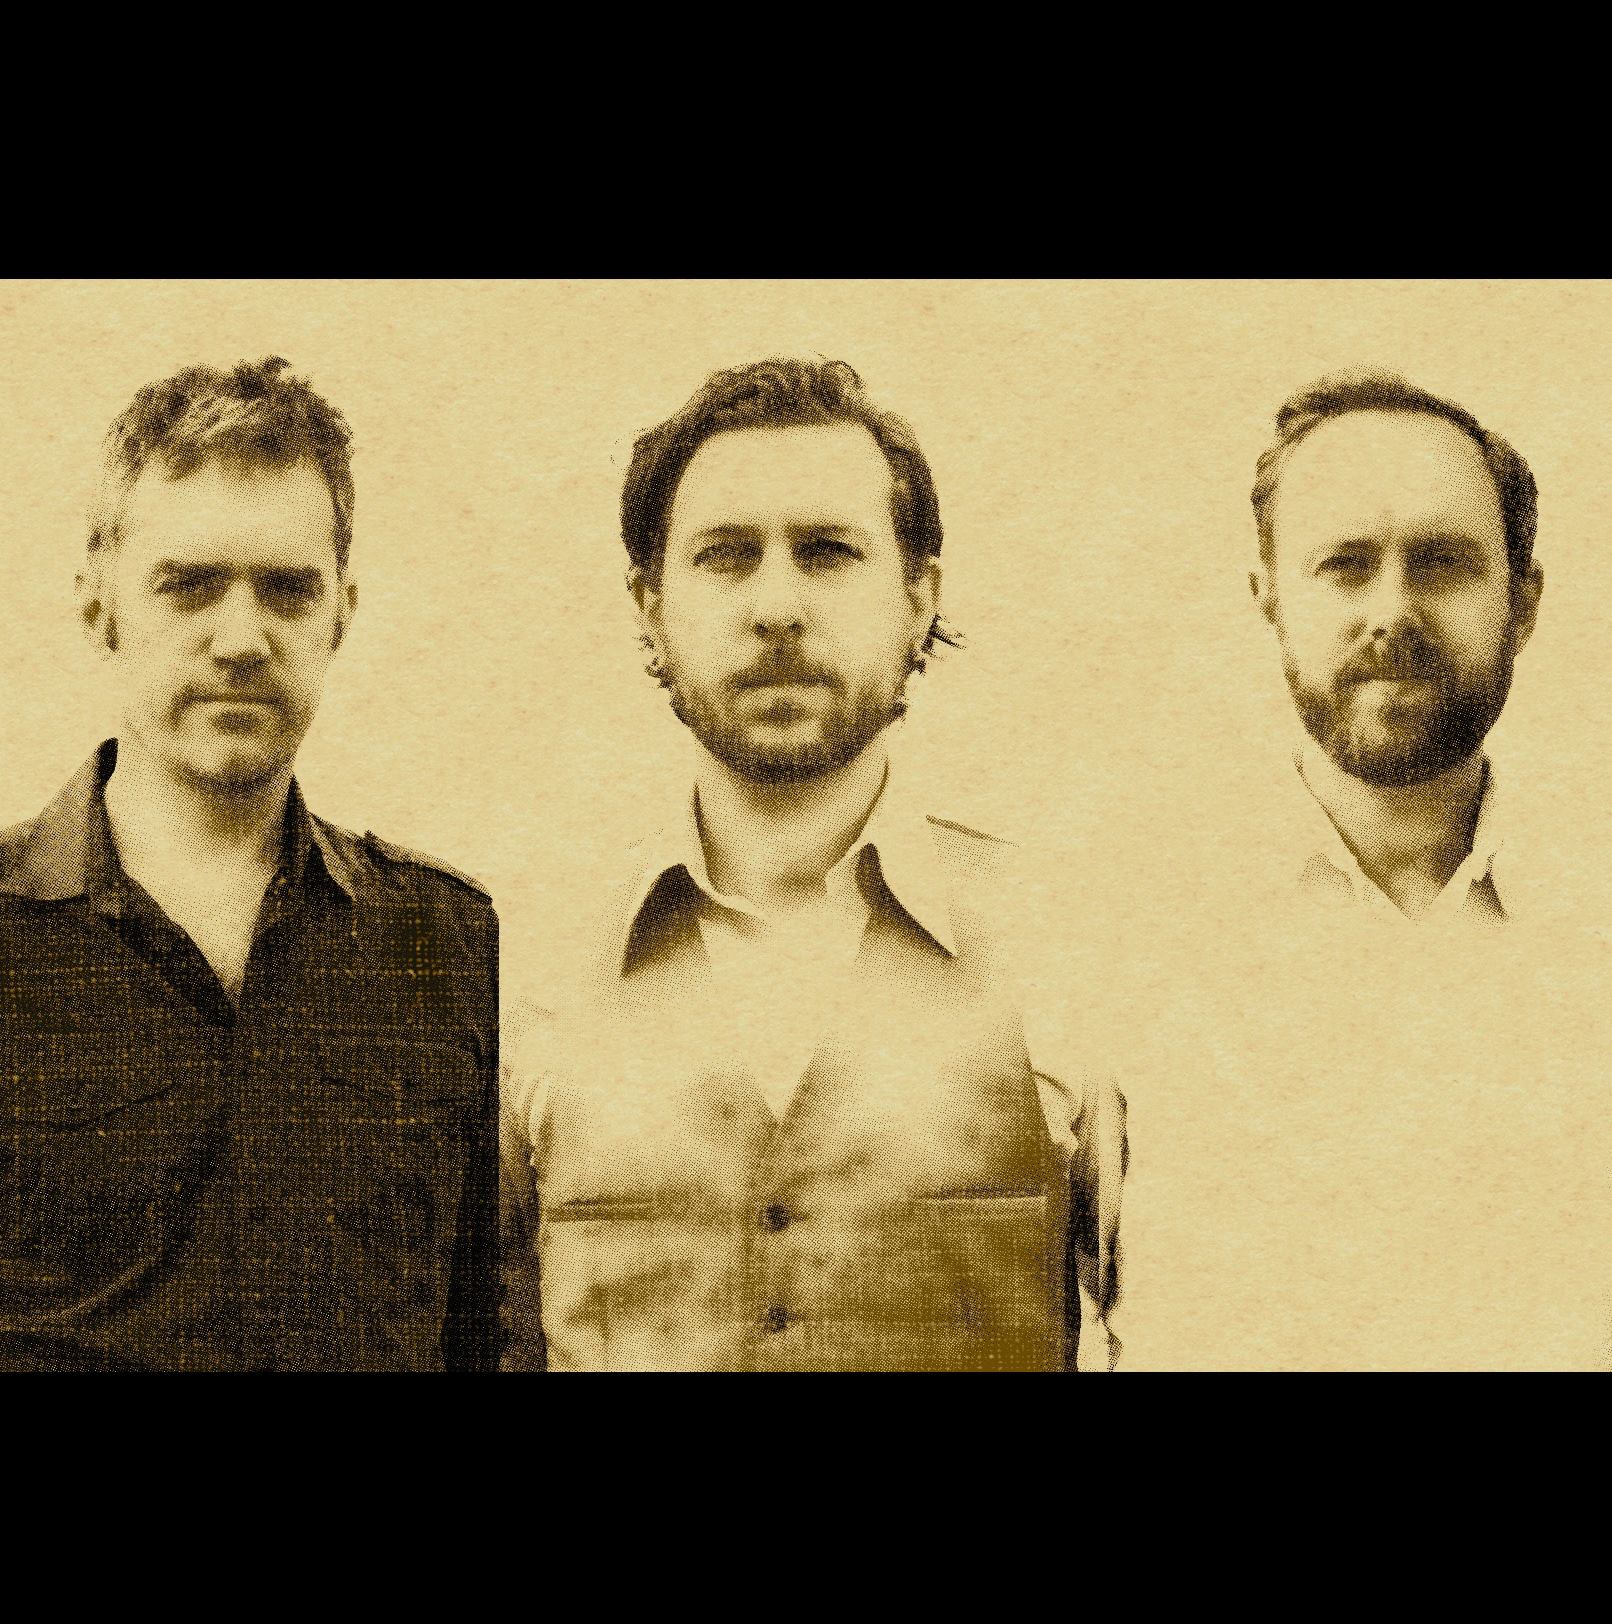 Interview with Great Lake Swimmers